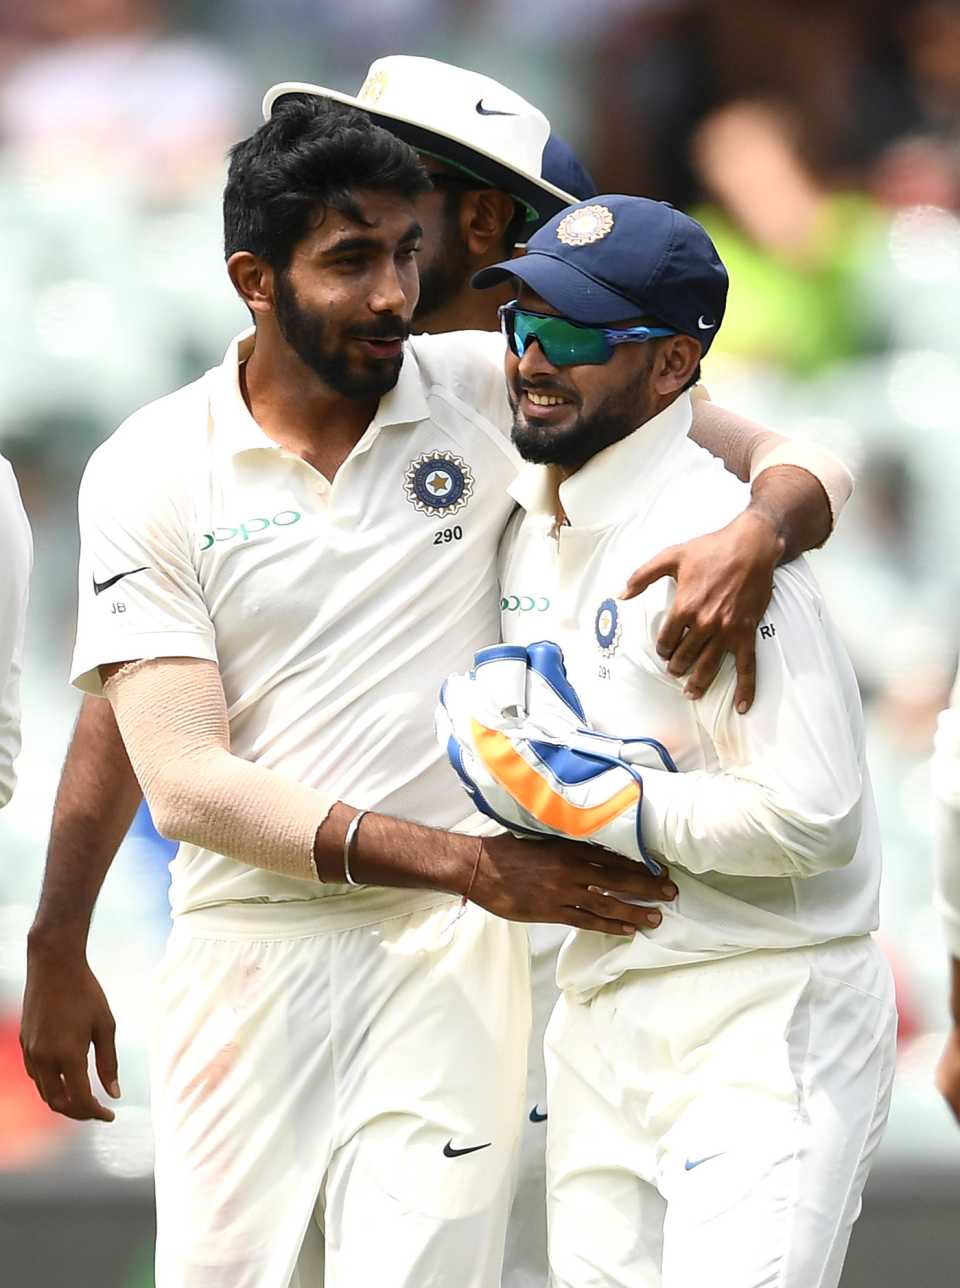 Jasprit Bumrah and Rishabh Pant celebrate a wicket, Australia v India, 1st Test, Adelaide, 5th day, December 10, 2018